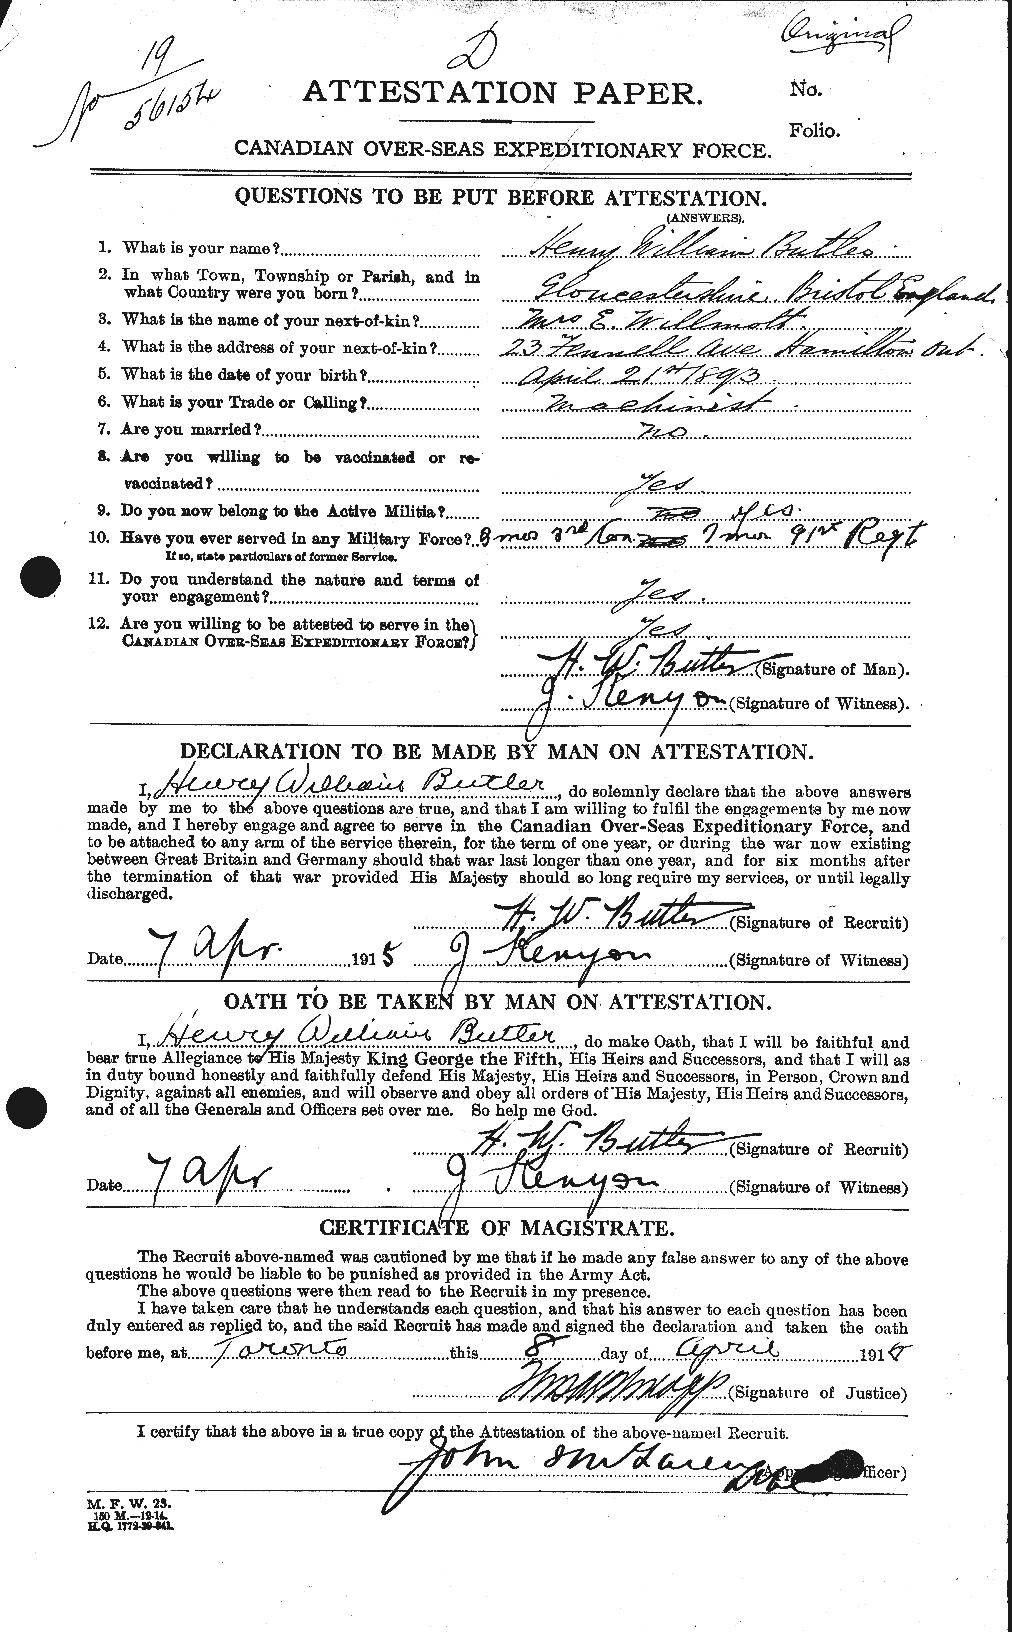 Personnel Records of the First World War - CEF 275961a